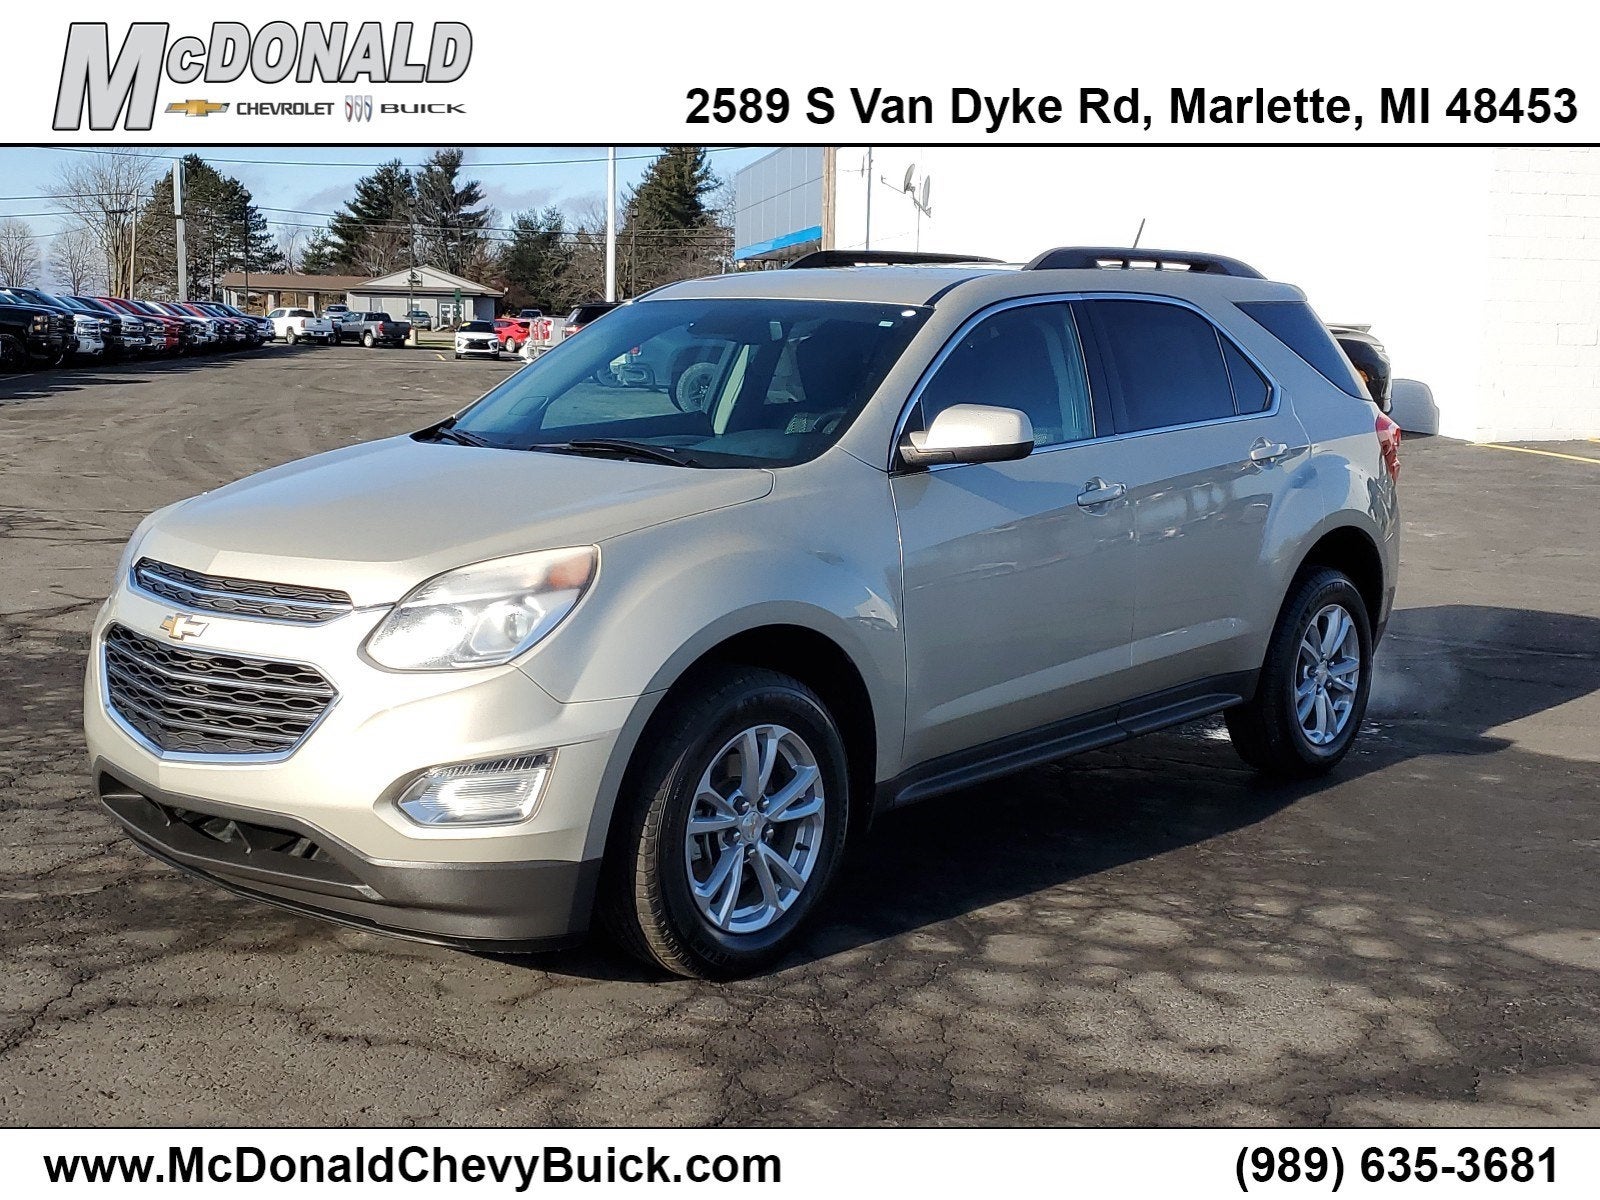 Used 2016 Chevrolet Equinox LT with VIN 1GNALCEK4GZ102079 for sale in Marlette, MI